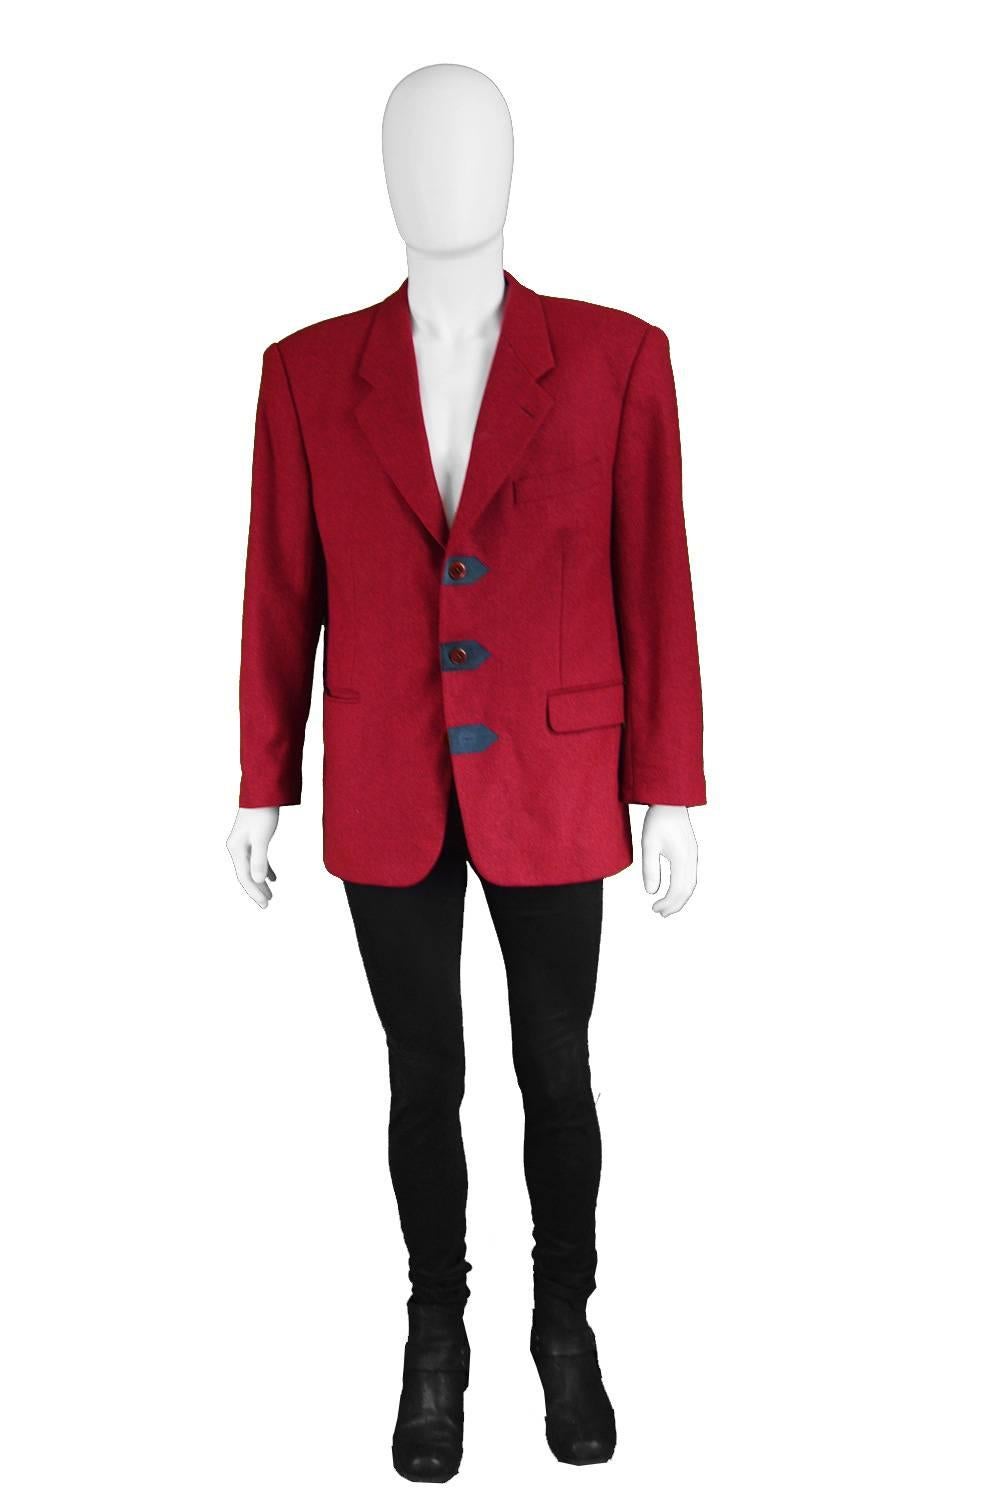 Kenzo Mens Vintage Red Herringbone Wool Blazer with Suede Details, 1980s

Size: Marked 52 which is roughly a men's Large to XL. Please check measurements.
Chest - 44” / 112cm (allow a couple of inches room for movement)
Waist - 40” / 101cm
Length